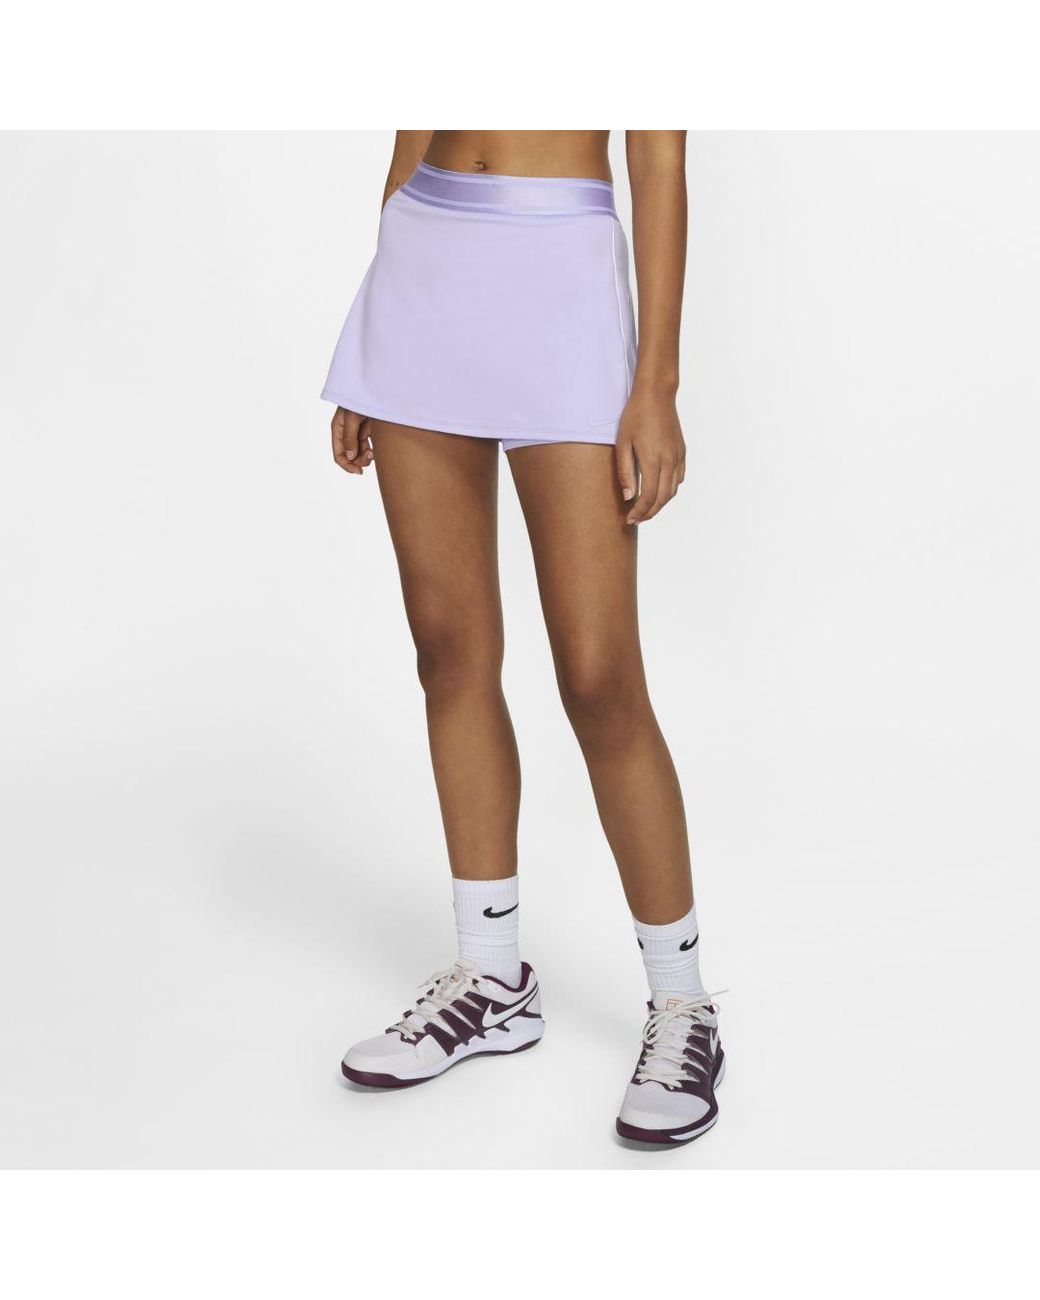 Nike Synthetic Court Dri-fit Tennis Skirt in Purple | Lyst